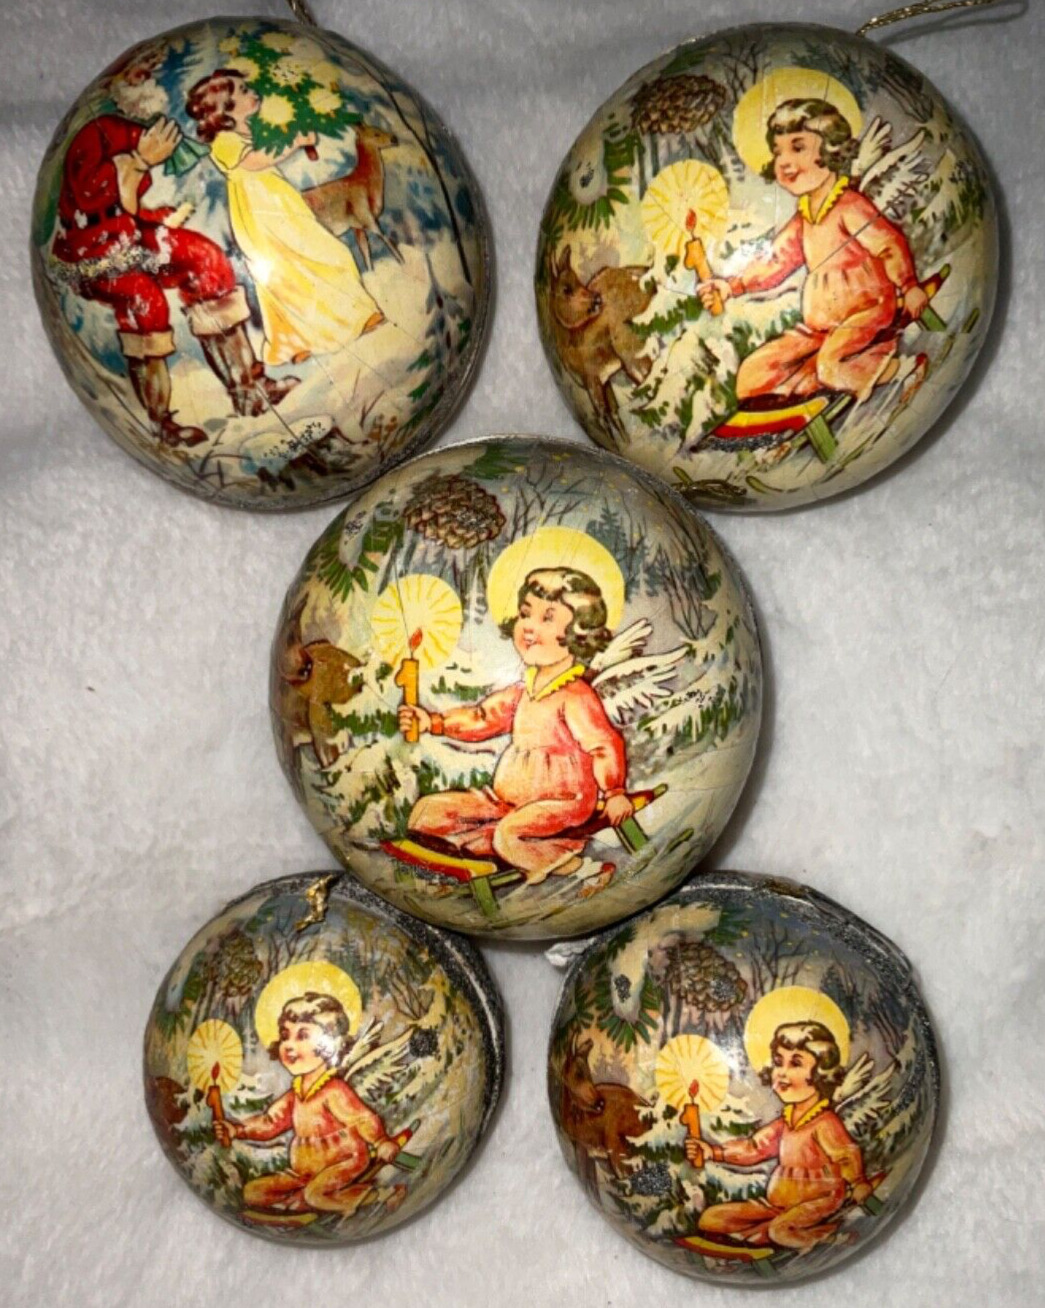 1956 K S Adler Christmas Paper Mache Candy Container Ornaments Lot of 6 P2